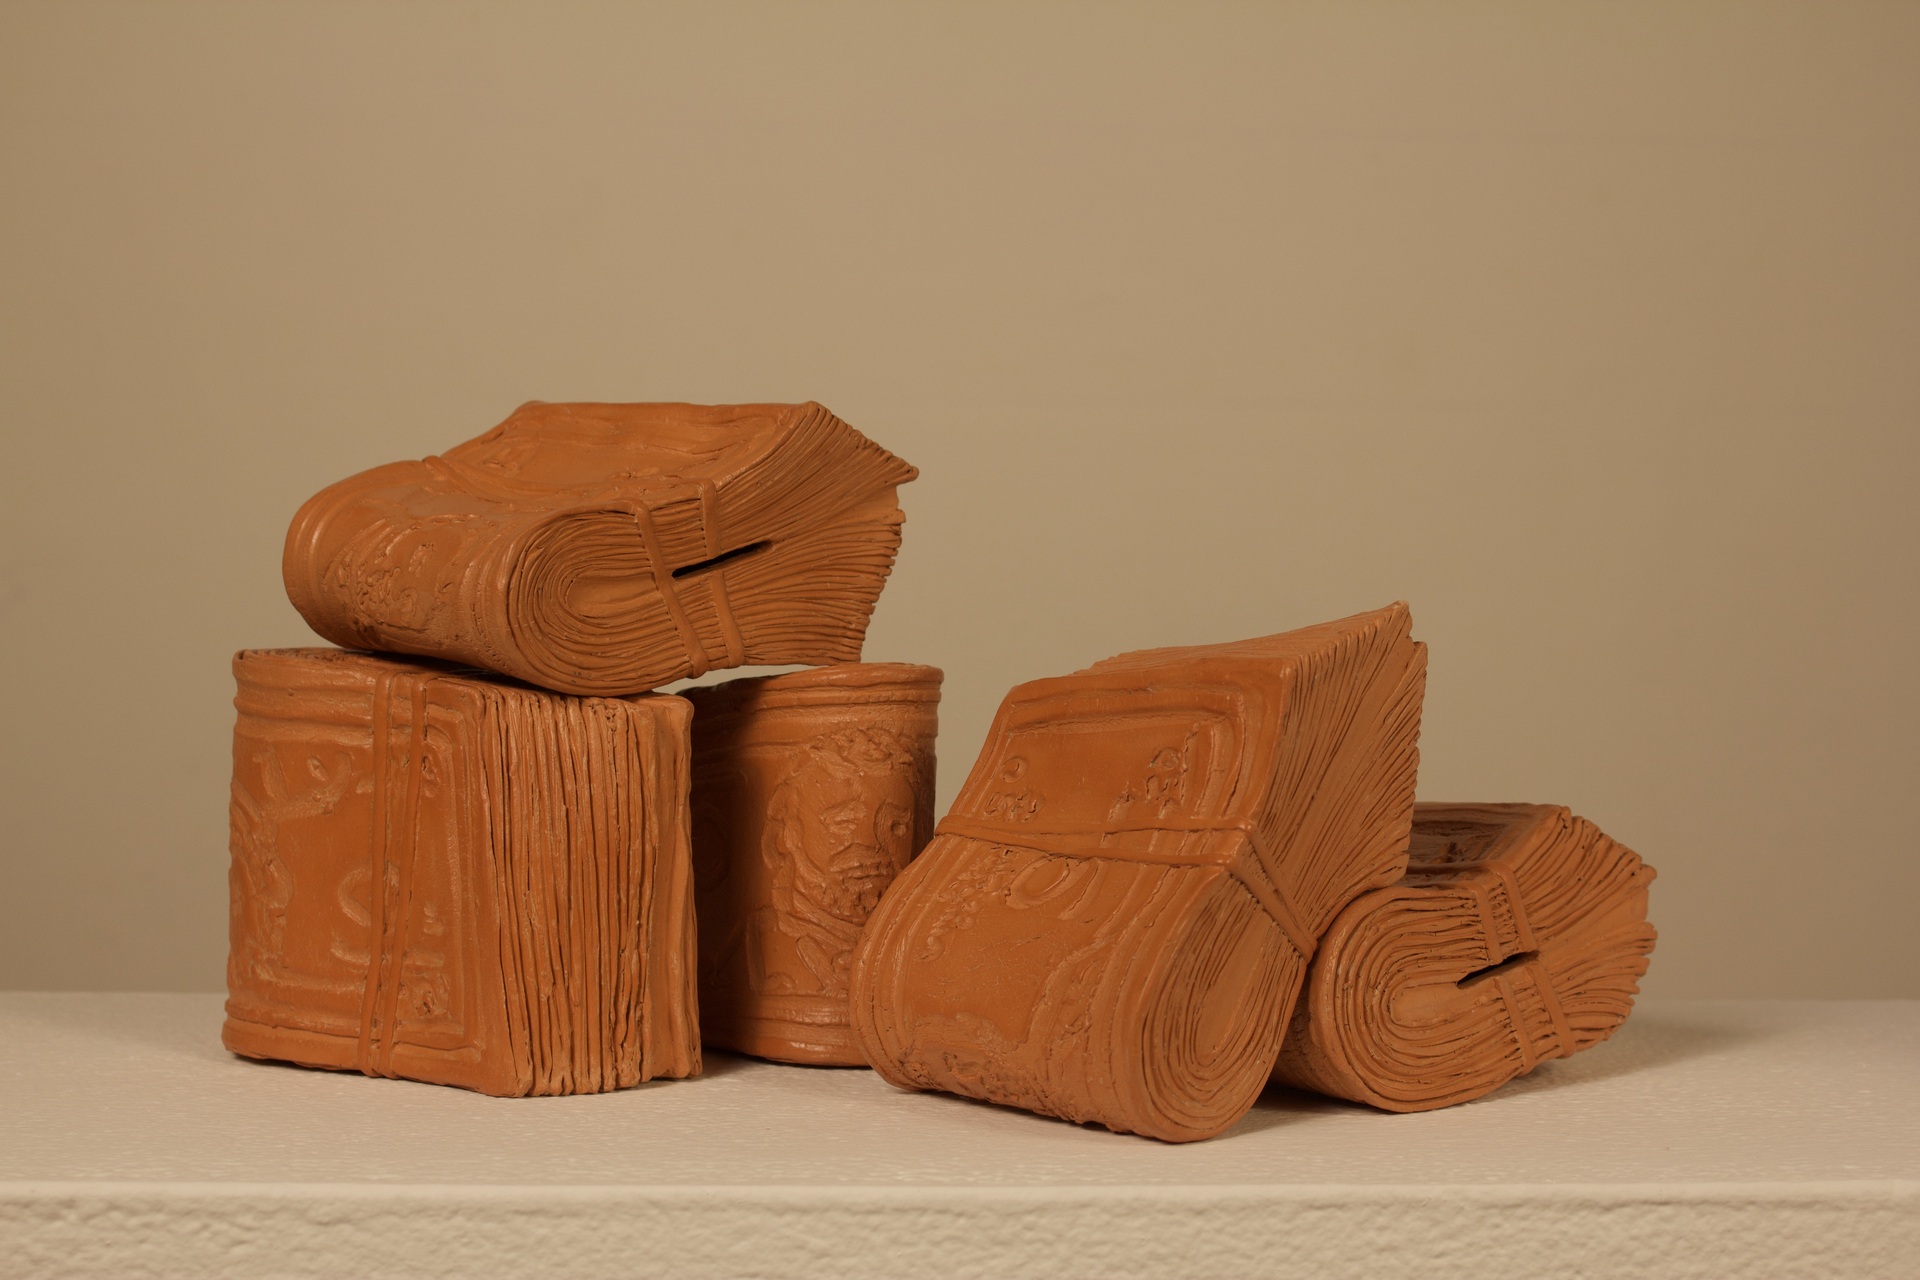 burnt orange colored clay sculptures that look like wads of cash rubber banded together. There are 5 different 'wads' of cash made of clay sitting around and resting on each other.